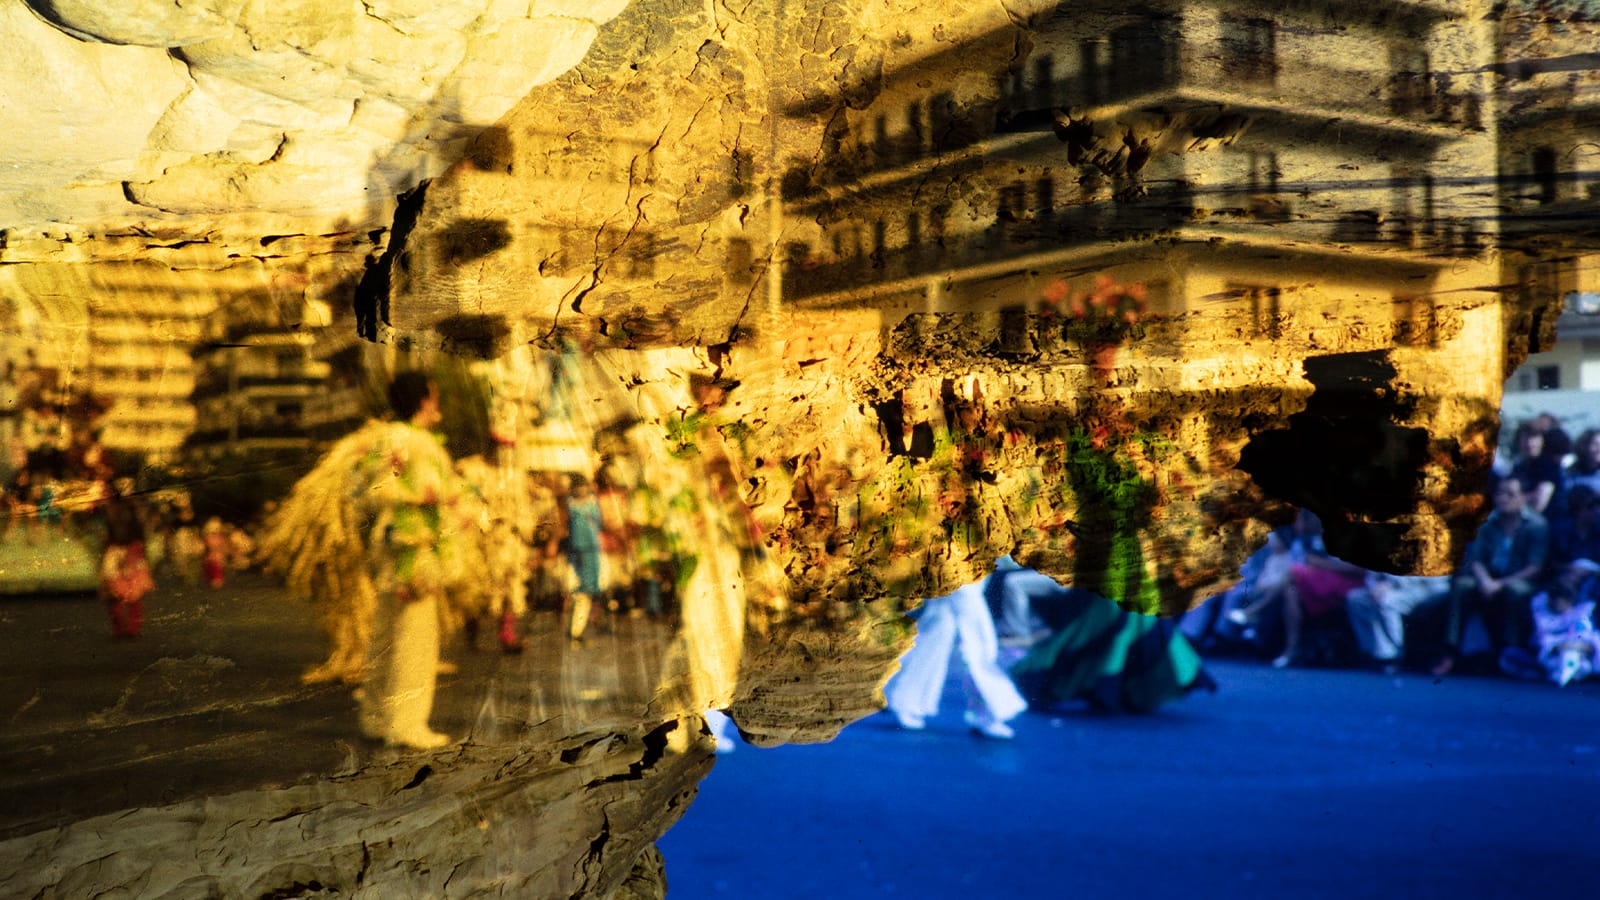 two photos overlaid with blue and yellow paint showing people in a carnival